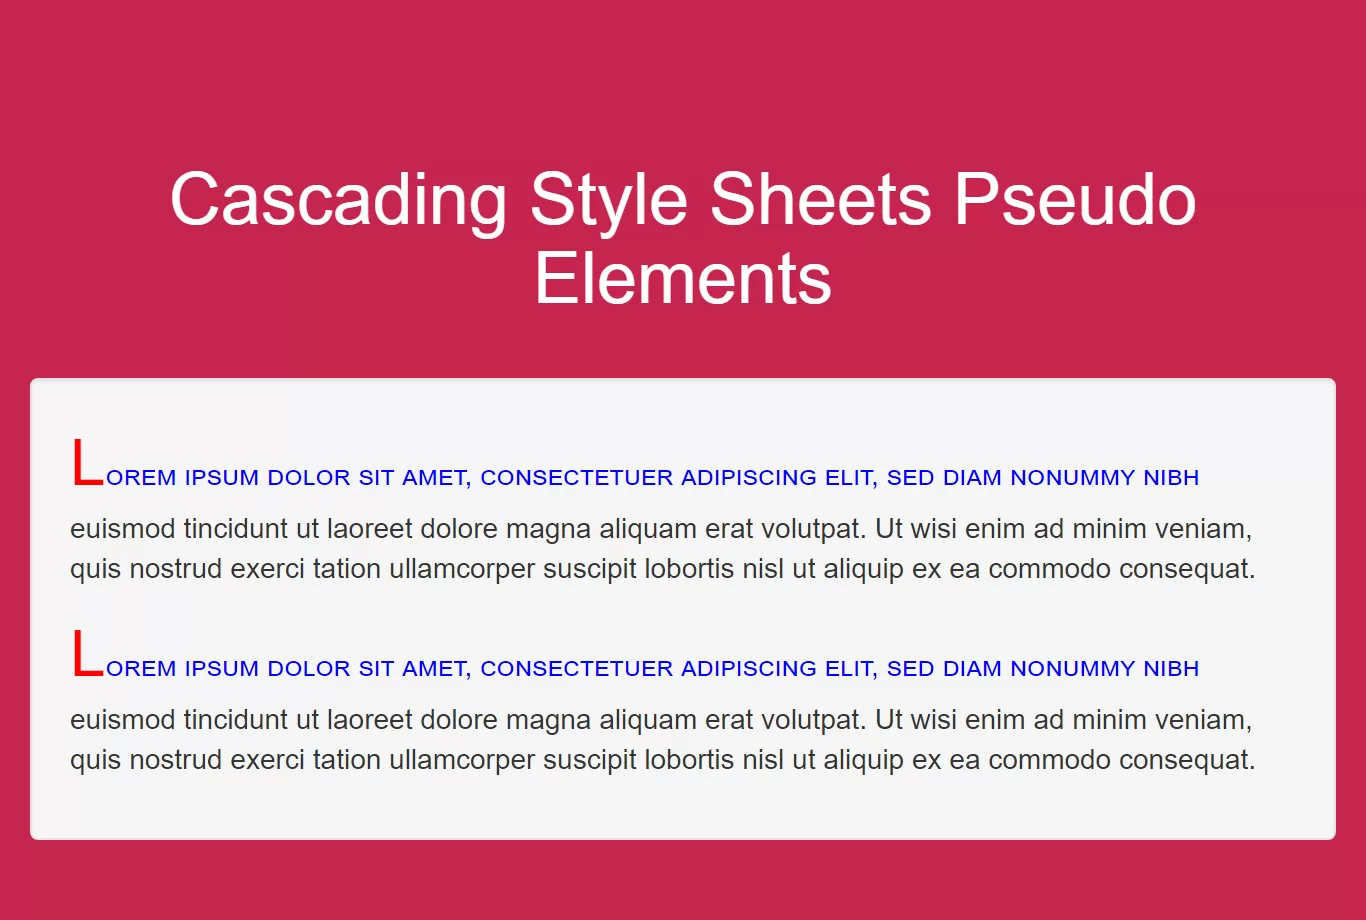 What Are The Cascading Style Sheets Pseudo Elements